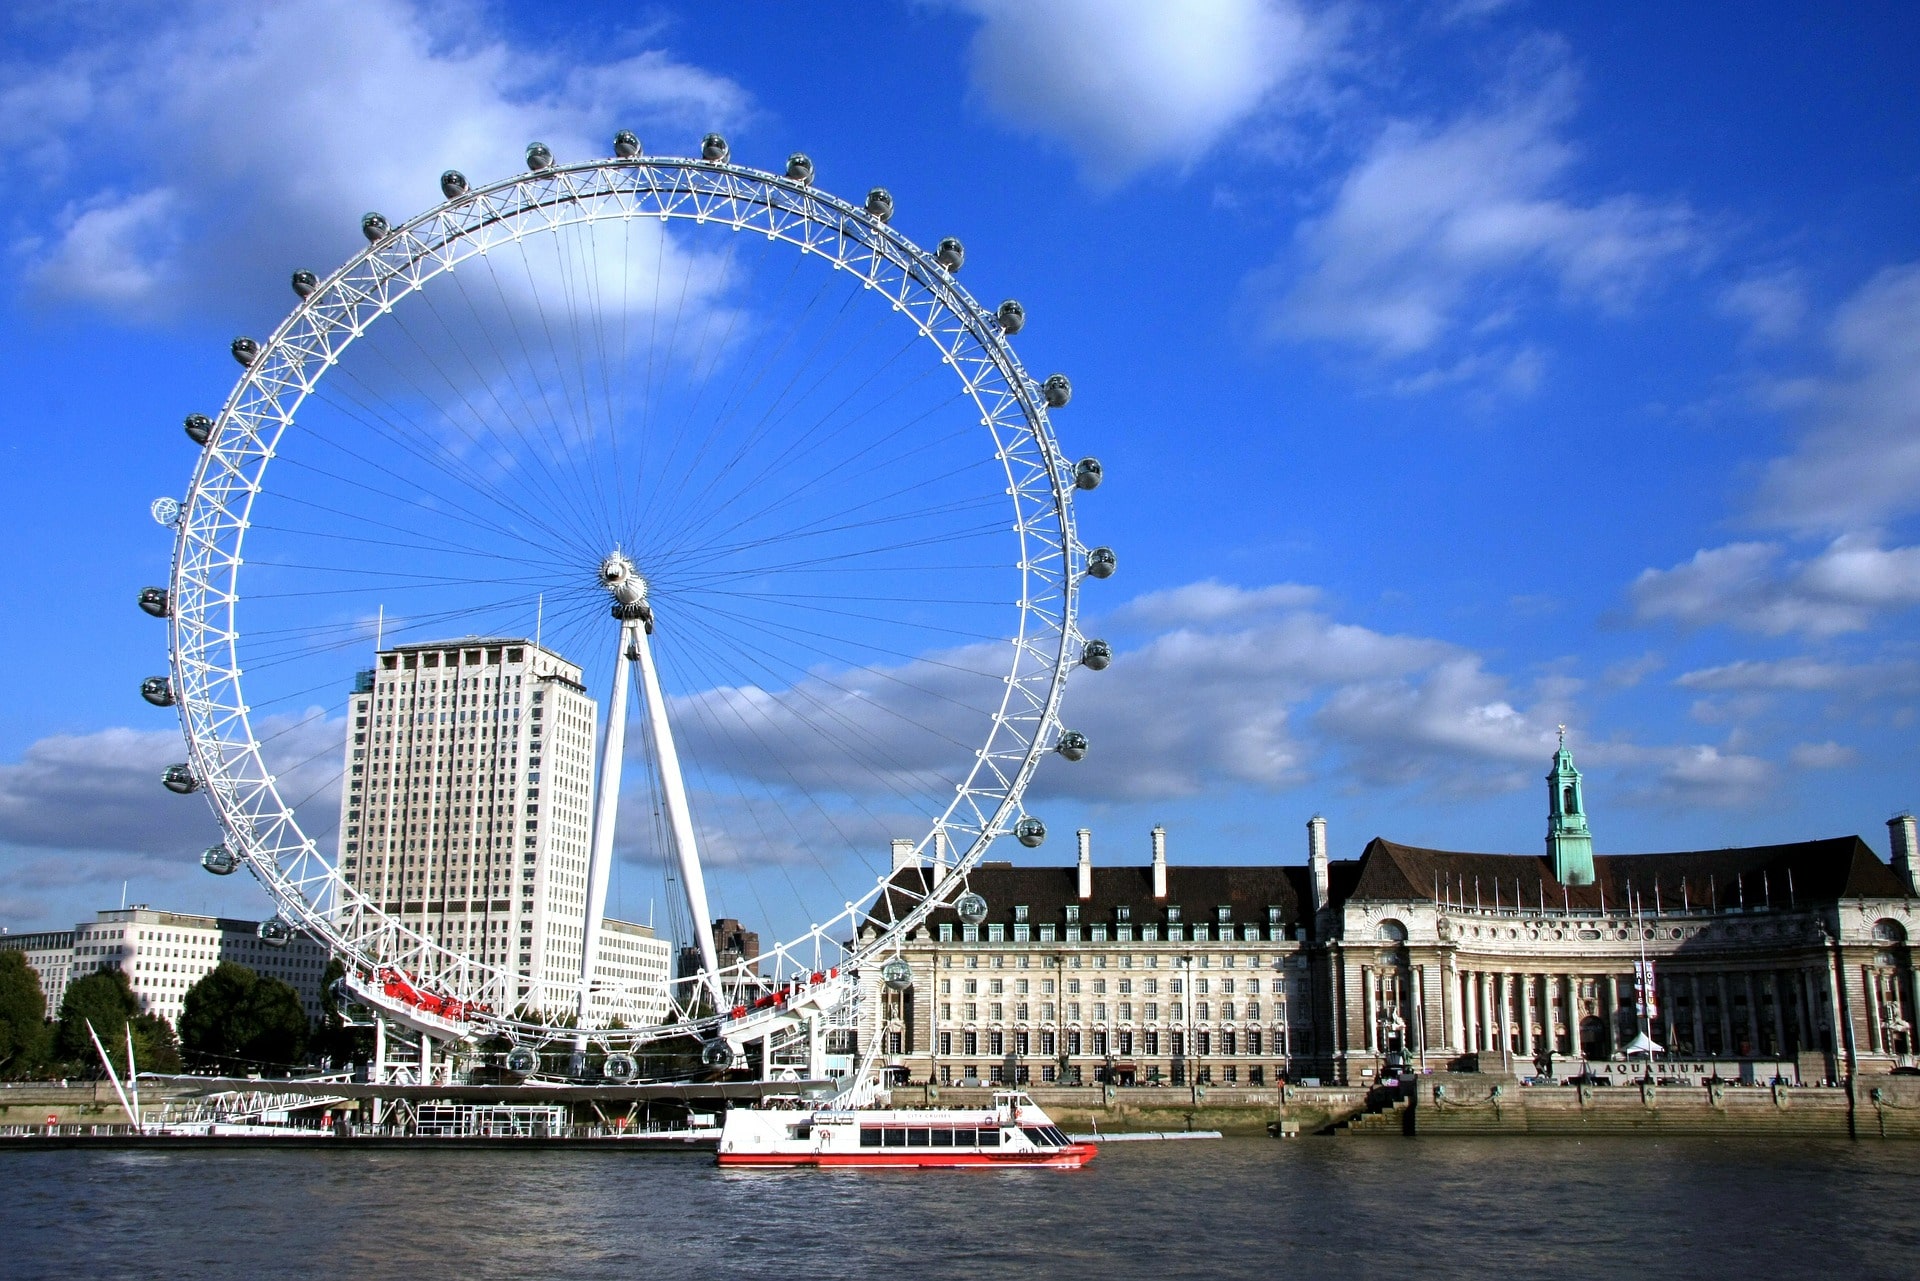 The majestic London Eye is a great place to visit in London